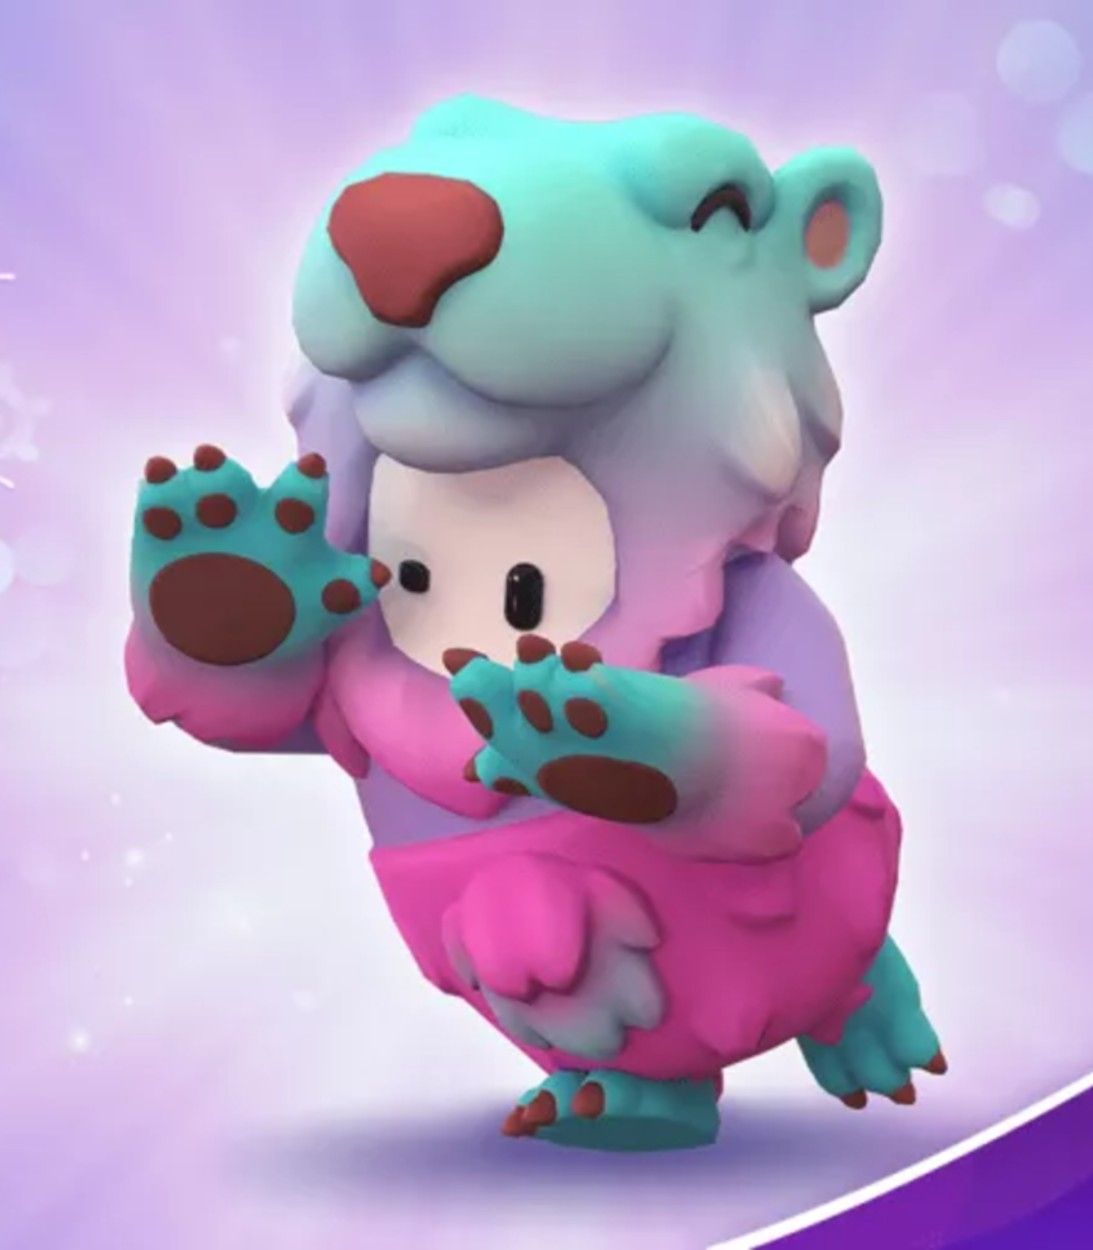 The free Slushie Bear skin for January 2021 from Prime Gaming in Fall Guys